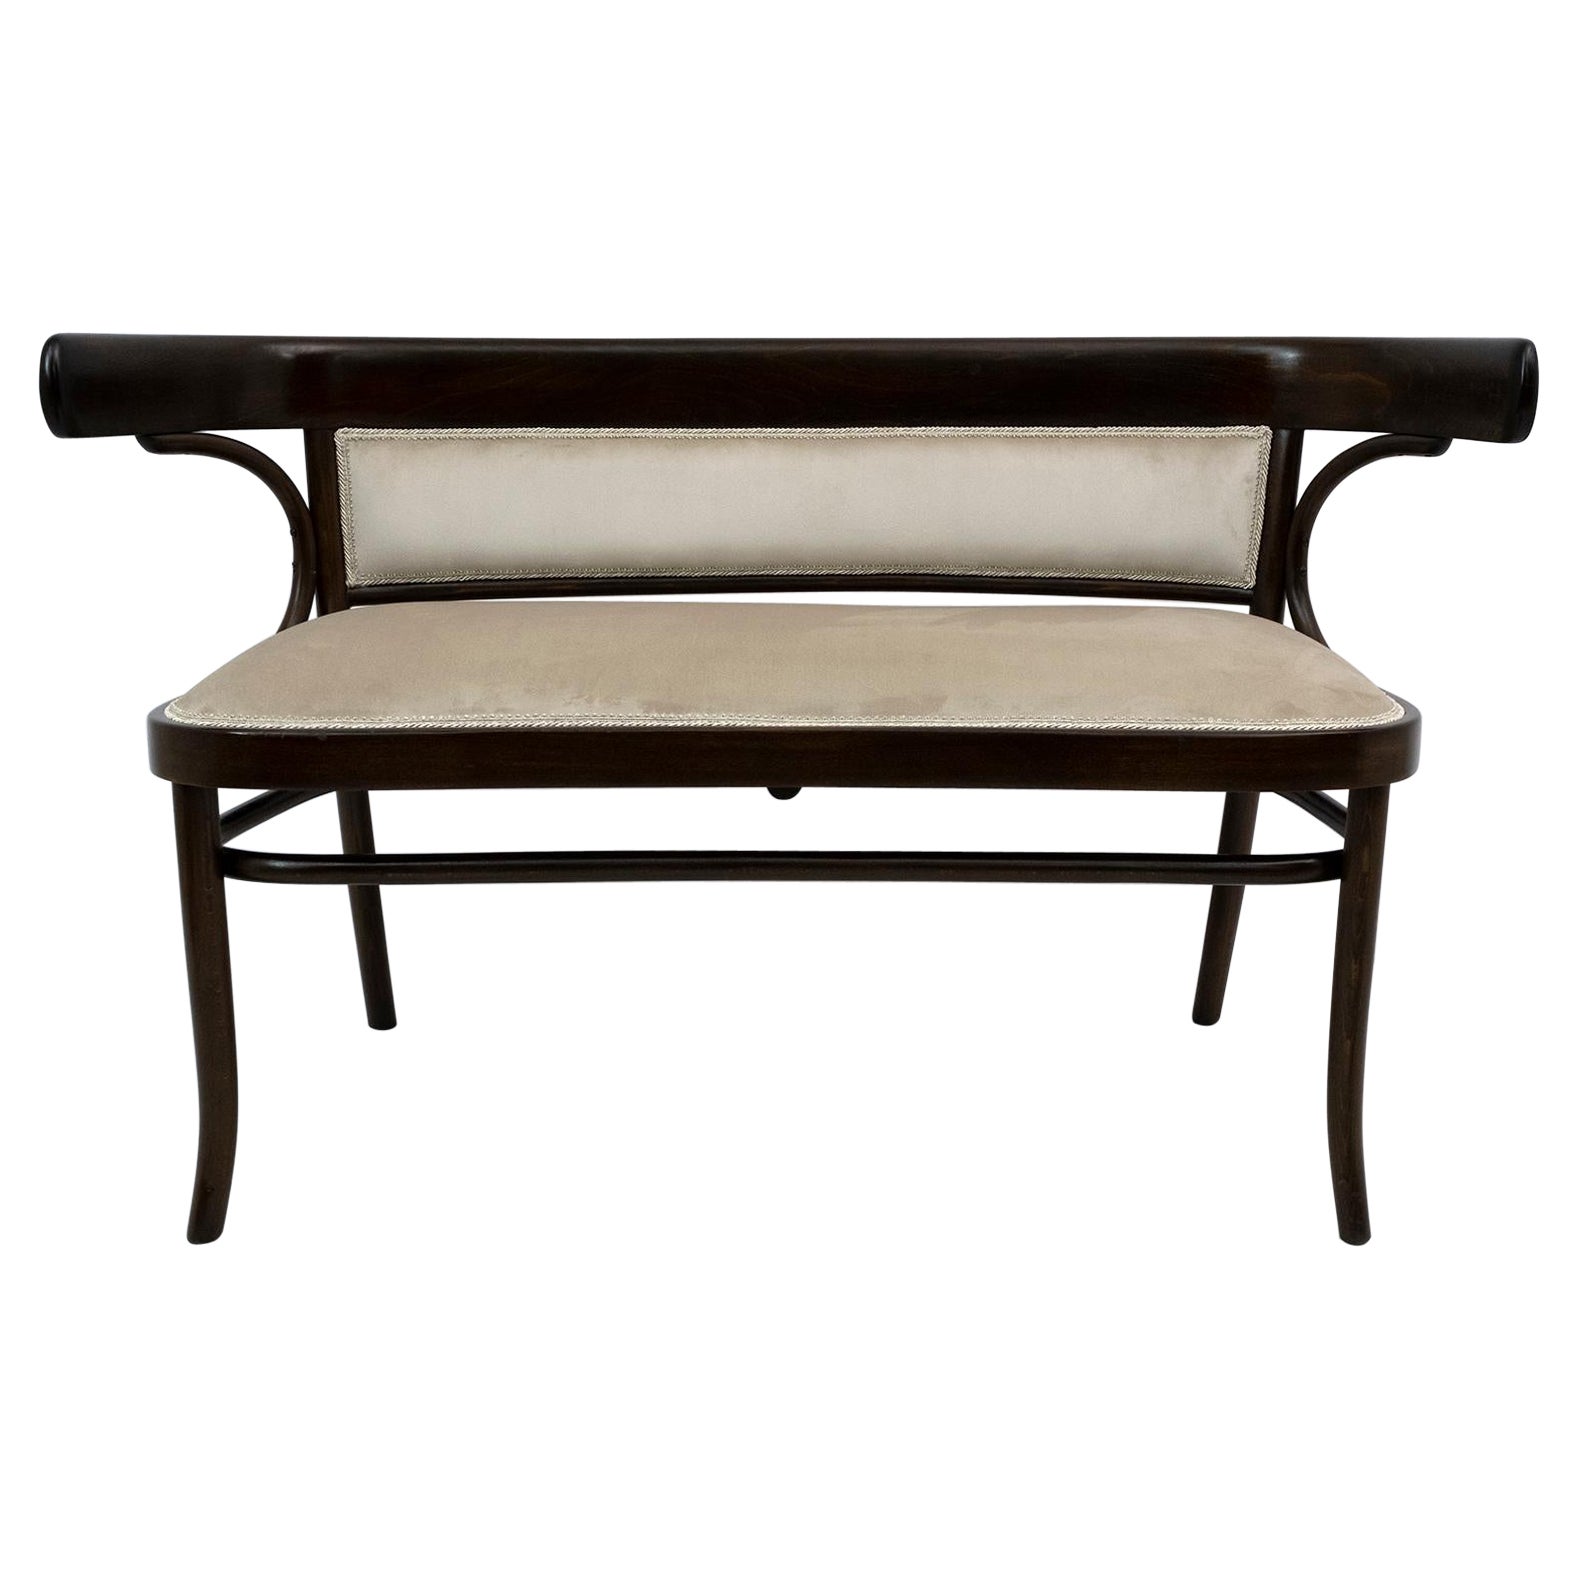 Thonet Austrian Curved Wood Loveseat Bench, 1920s